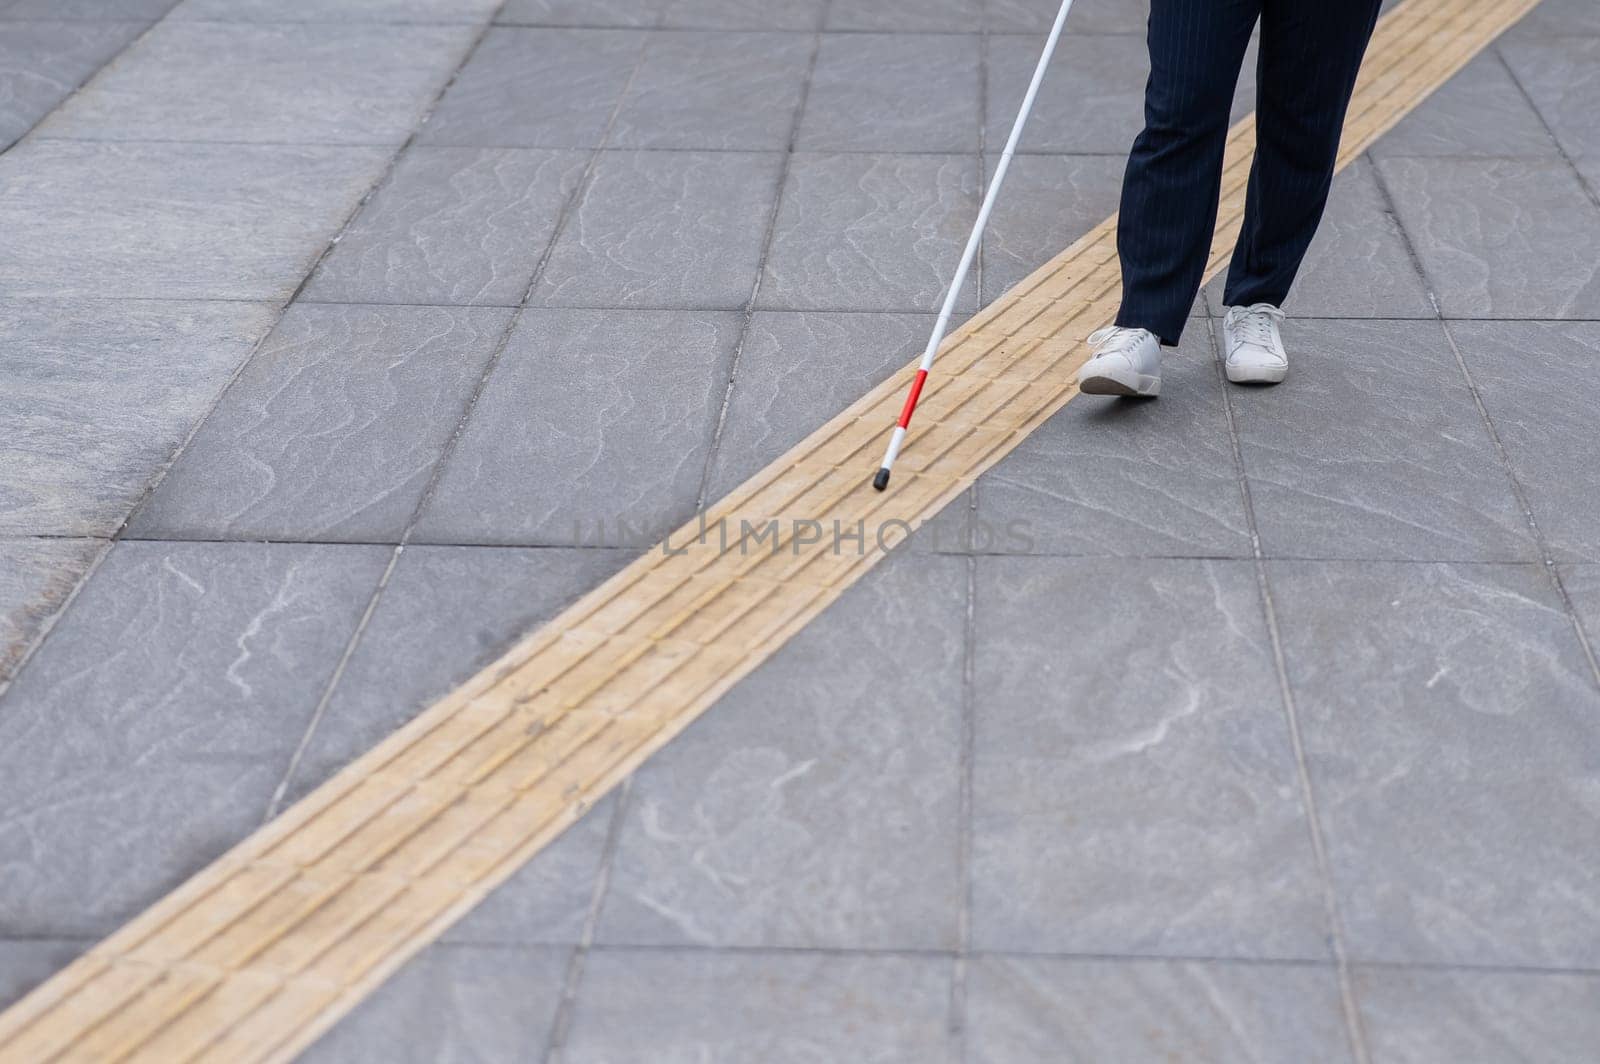 Close-up of the legs of a blind businesswoman walking along a tactile tile with a cane